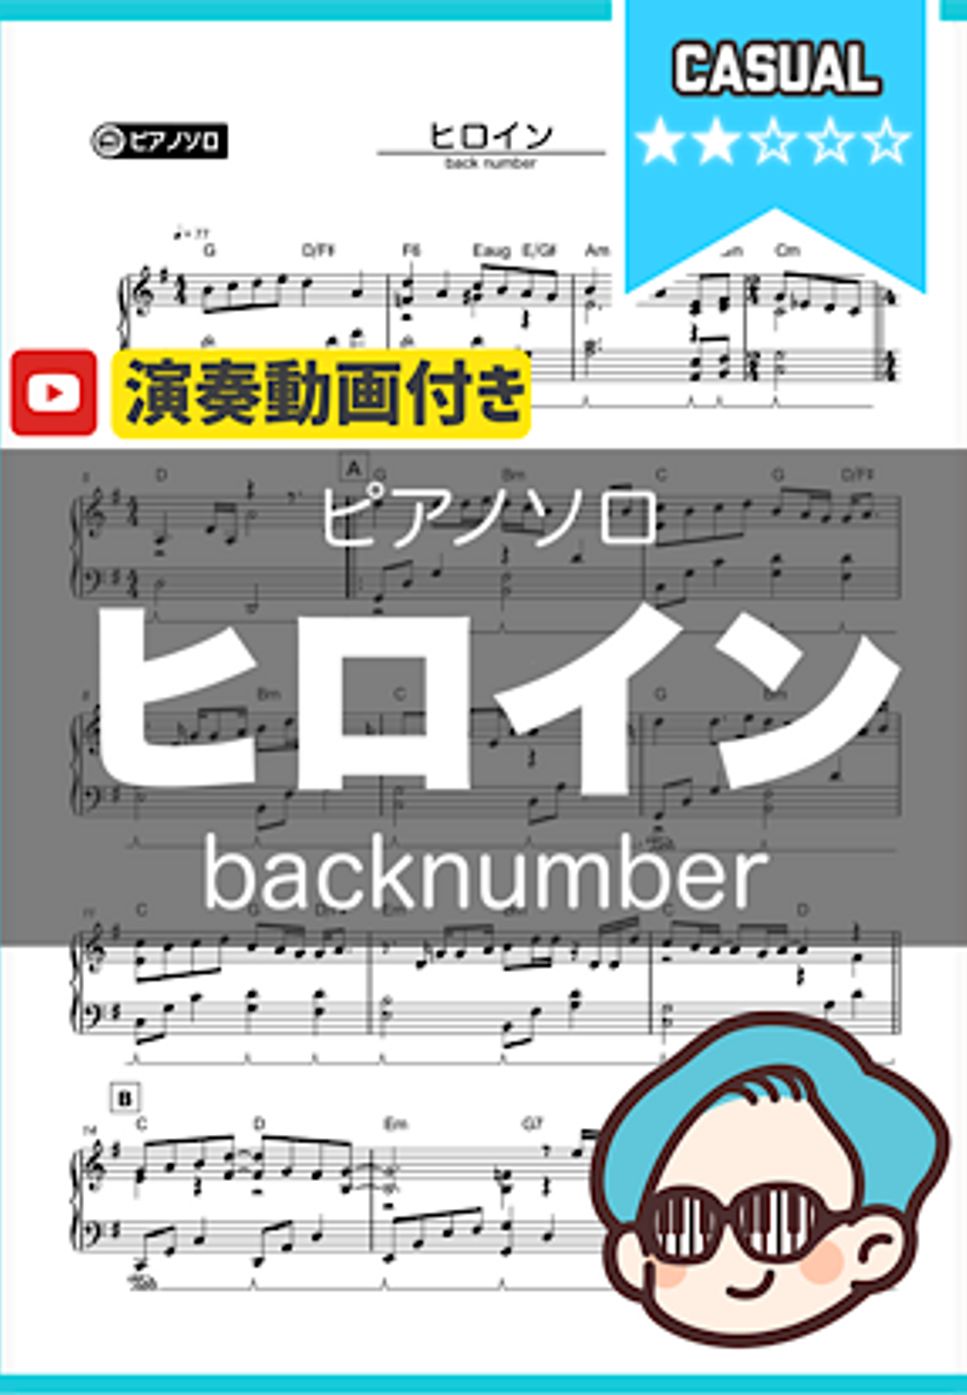 back number - ヒロイン by シータピアノ